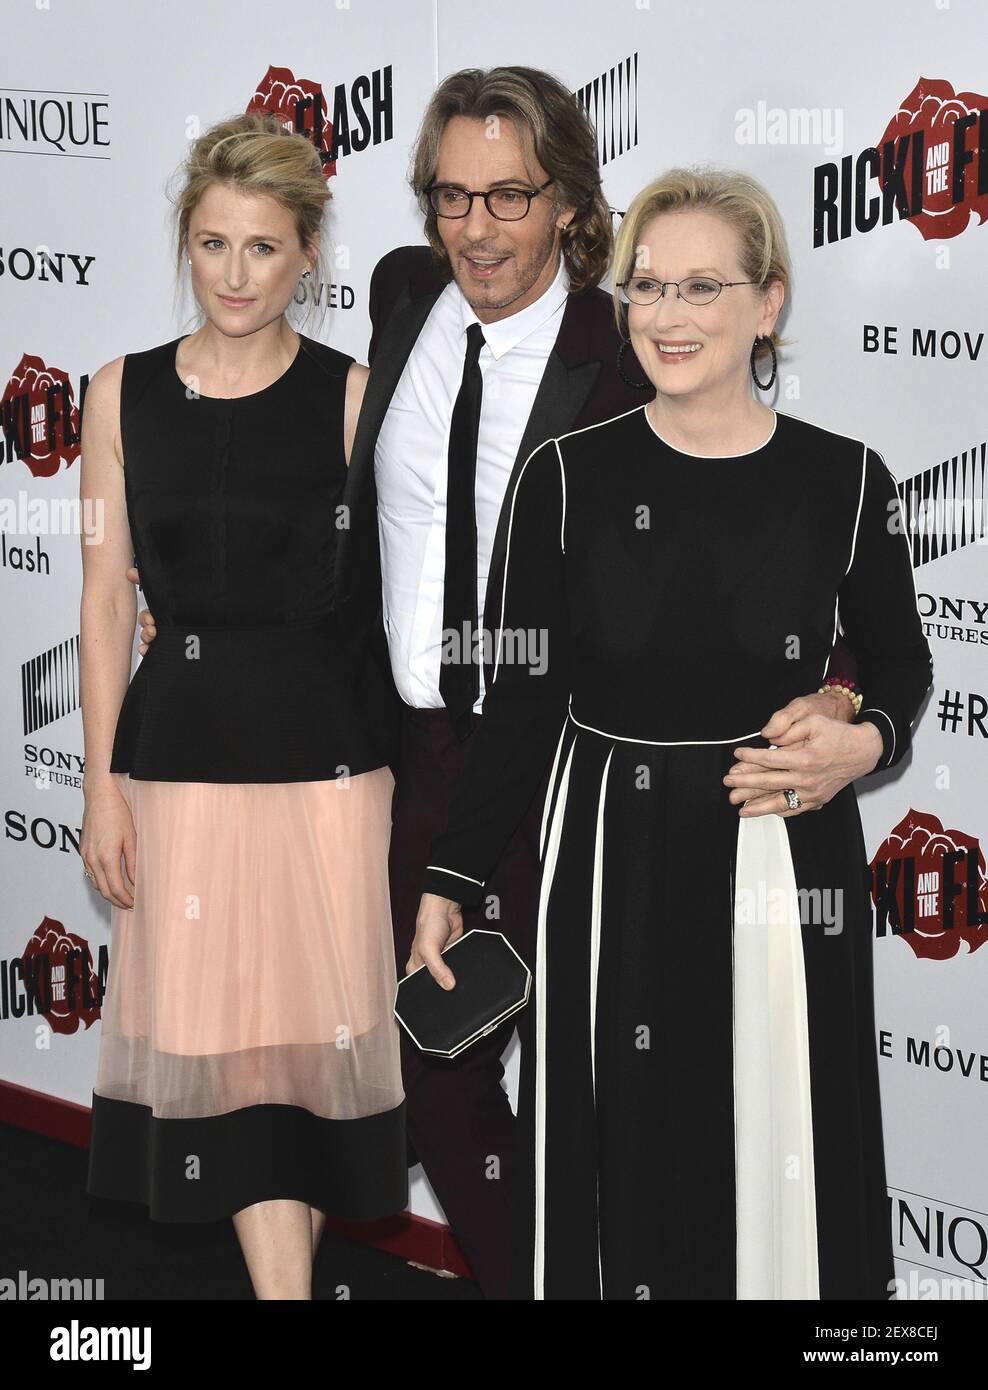 Mamie Gummer, Rick Springfield and Meryl Streep attend the "Ricki and the  Flash" New York Premiere in New York City on August 3, 2015. (Photo by  Jennifer Graylock) *** Please Use Credit